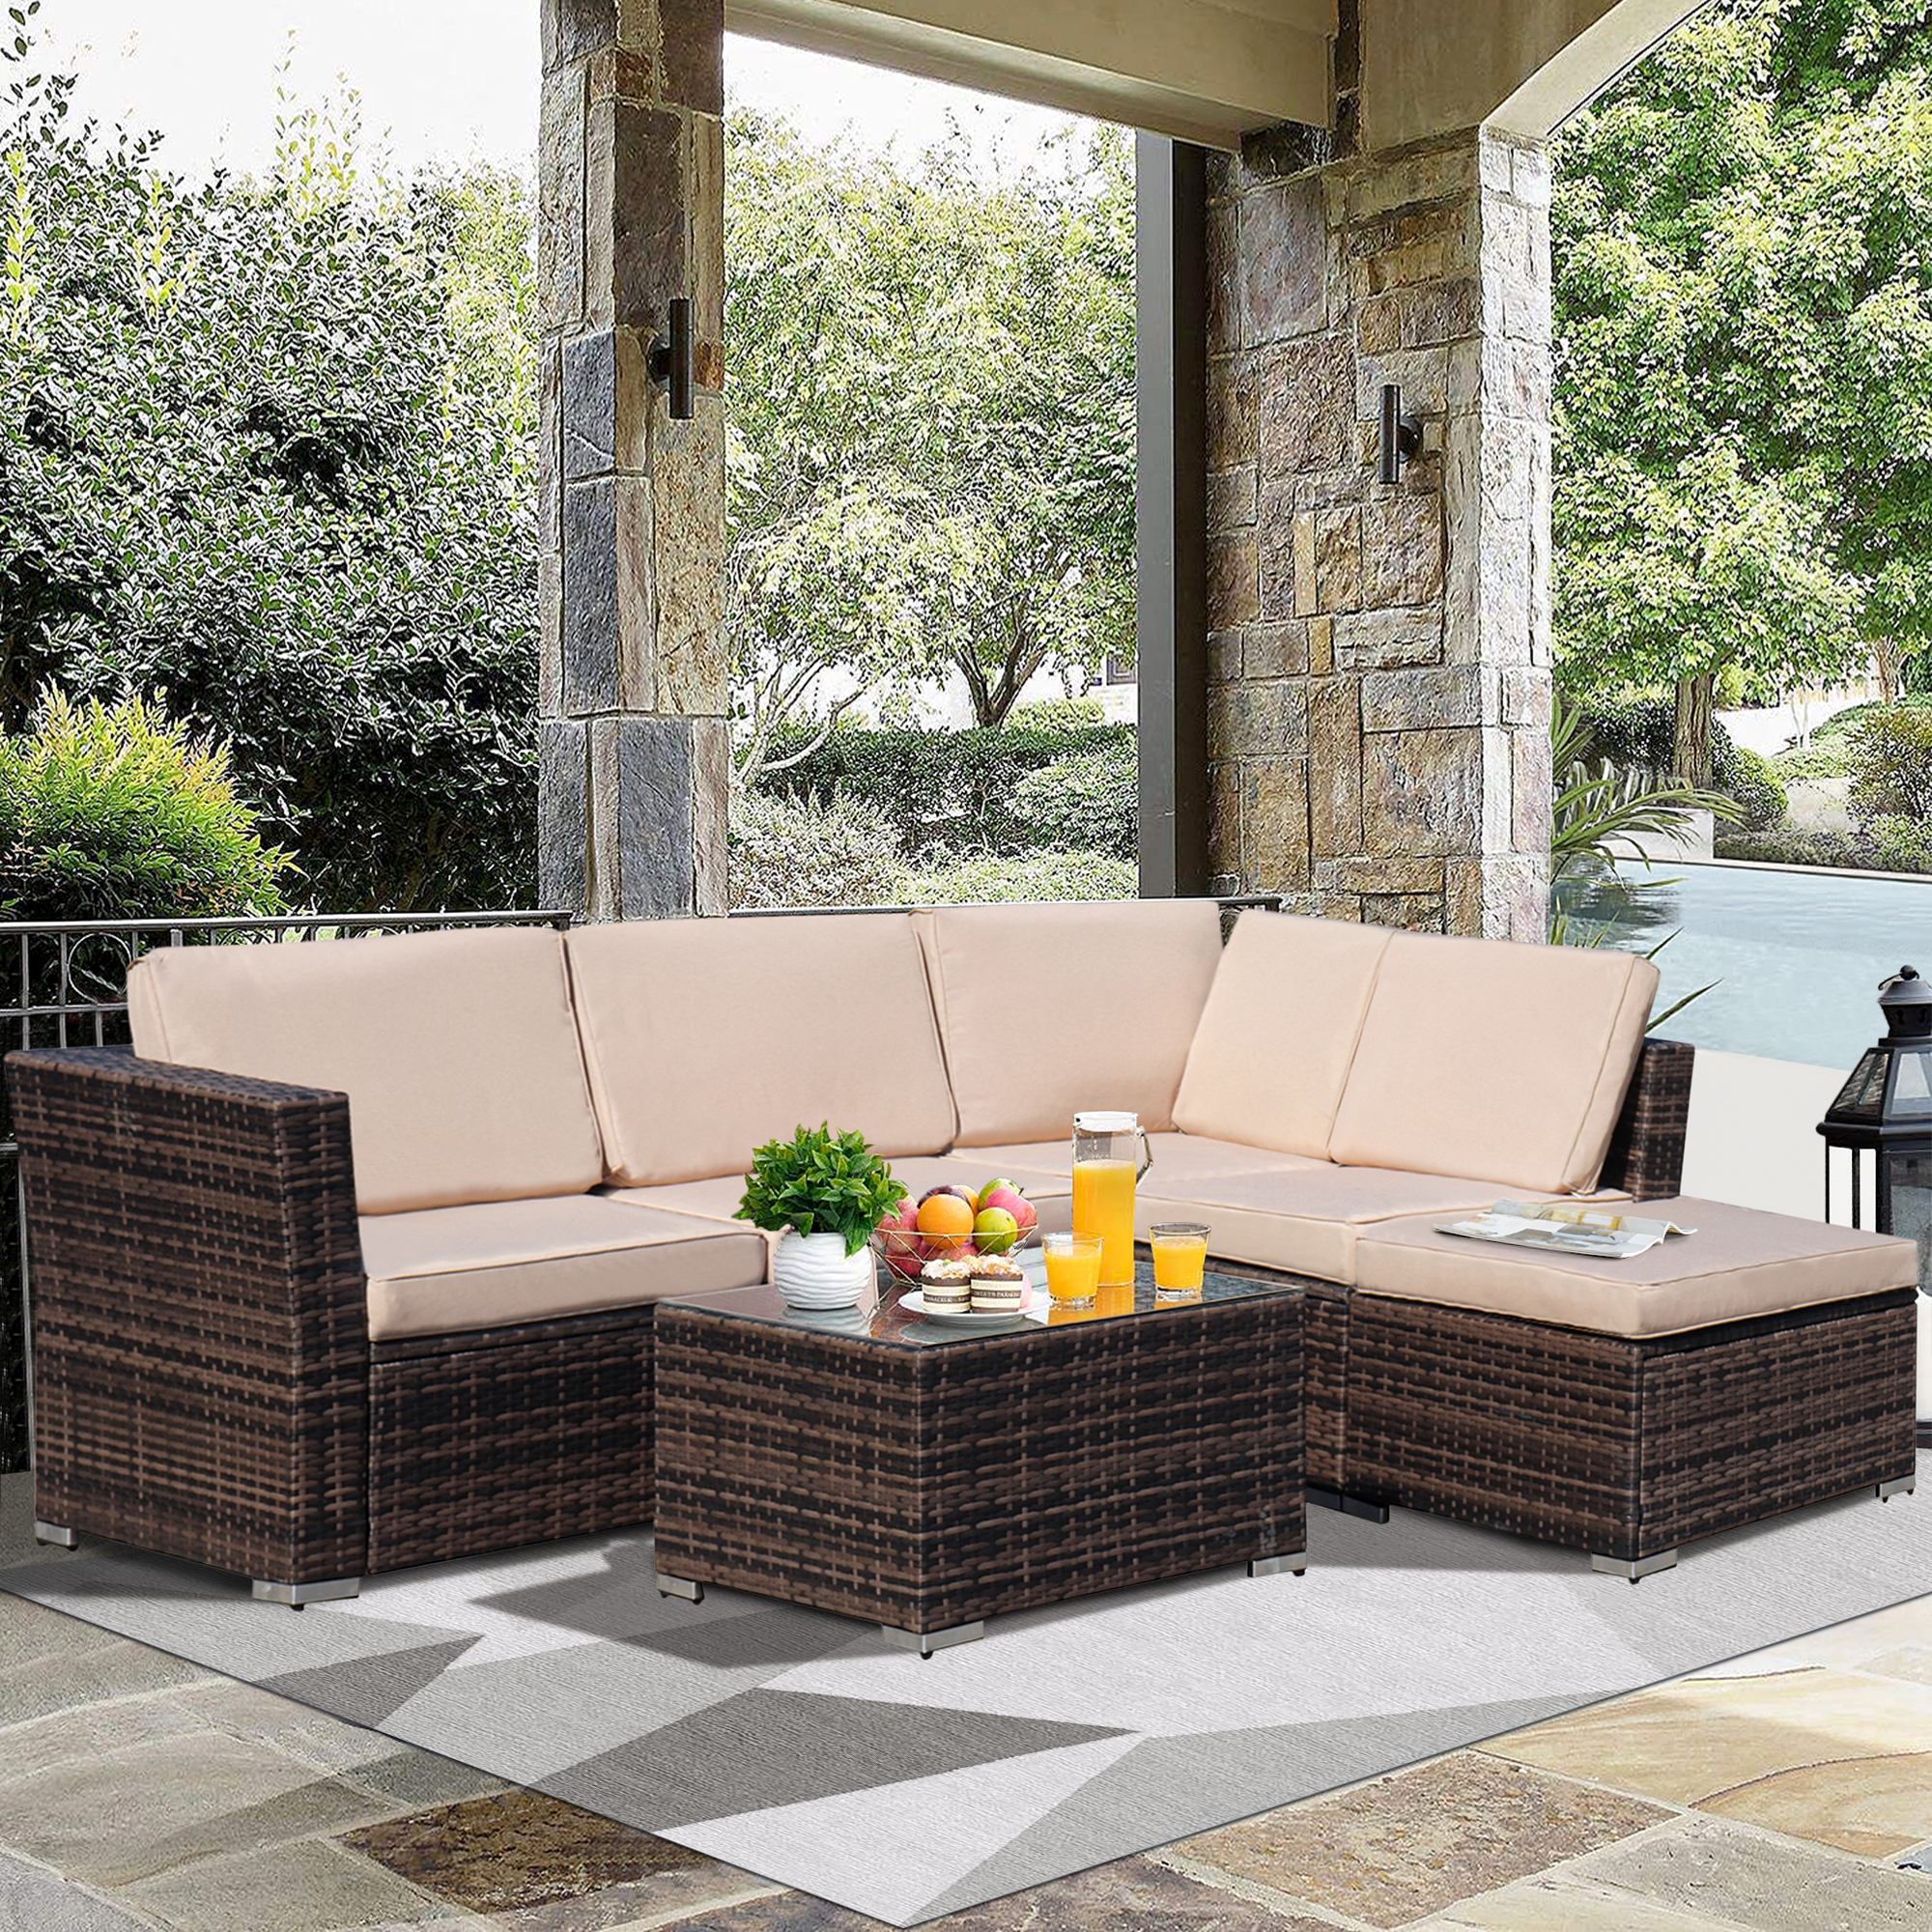 Patio Outdoor Furniture Sets, Patio Couch Sectional Furniture Set for Balcony Porch Backyard Deck Pool,with Chaise Lounge&Coffee Table&Washable Couch Cushions&Upgrade Wicker(4-Piece) (Brown) - image 1 of 9